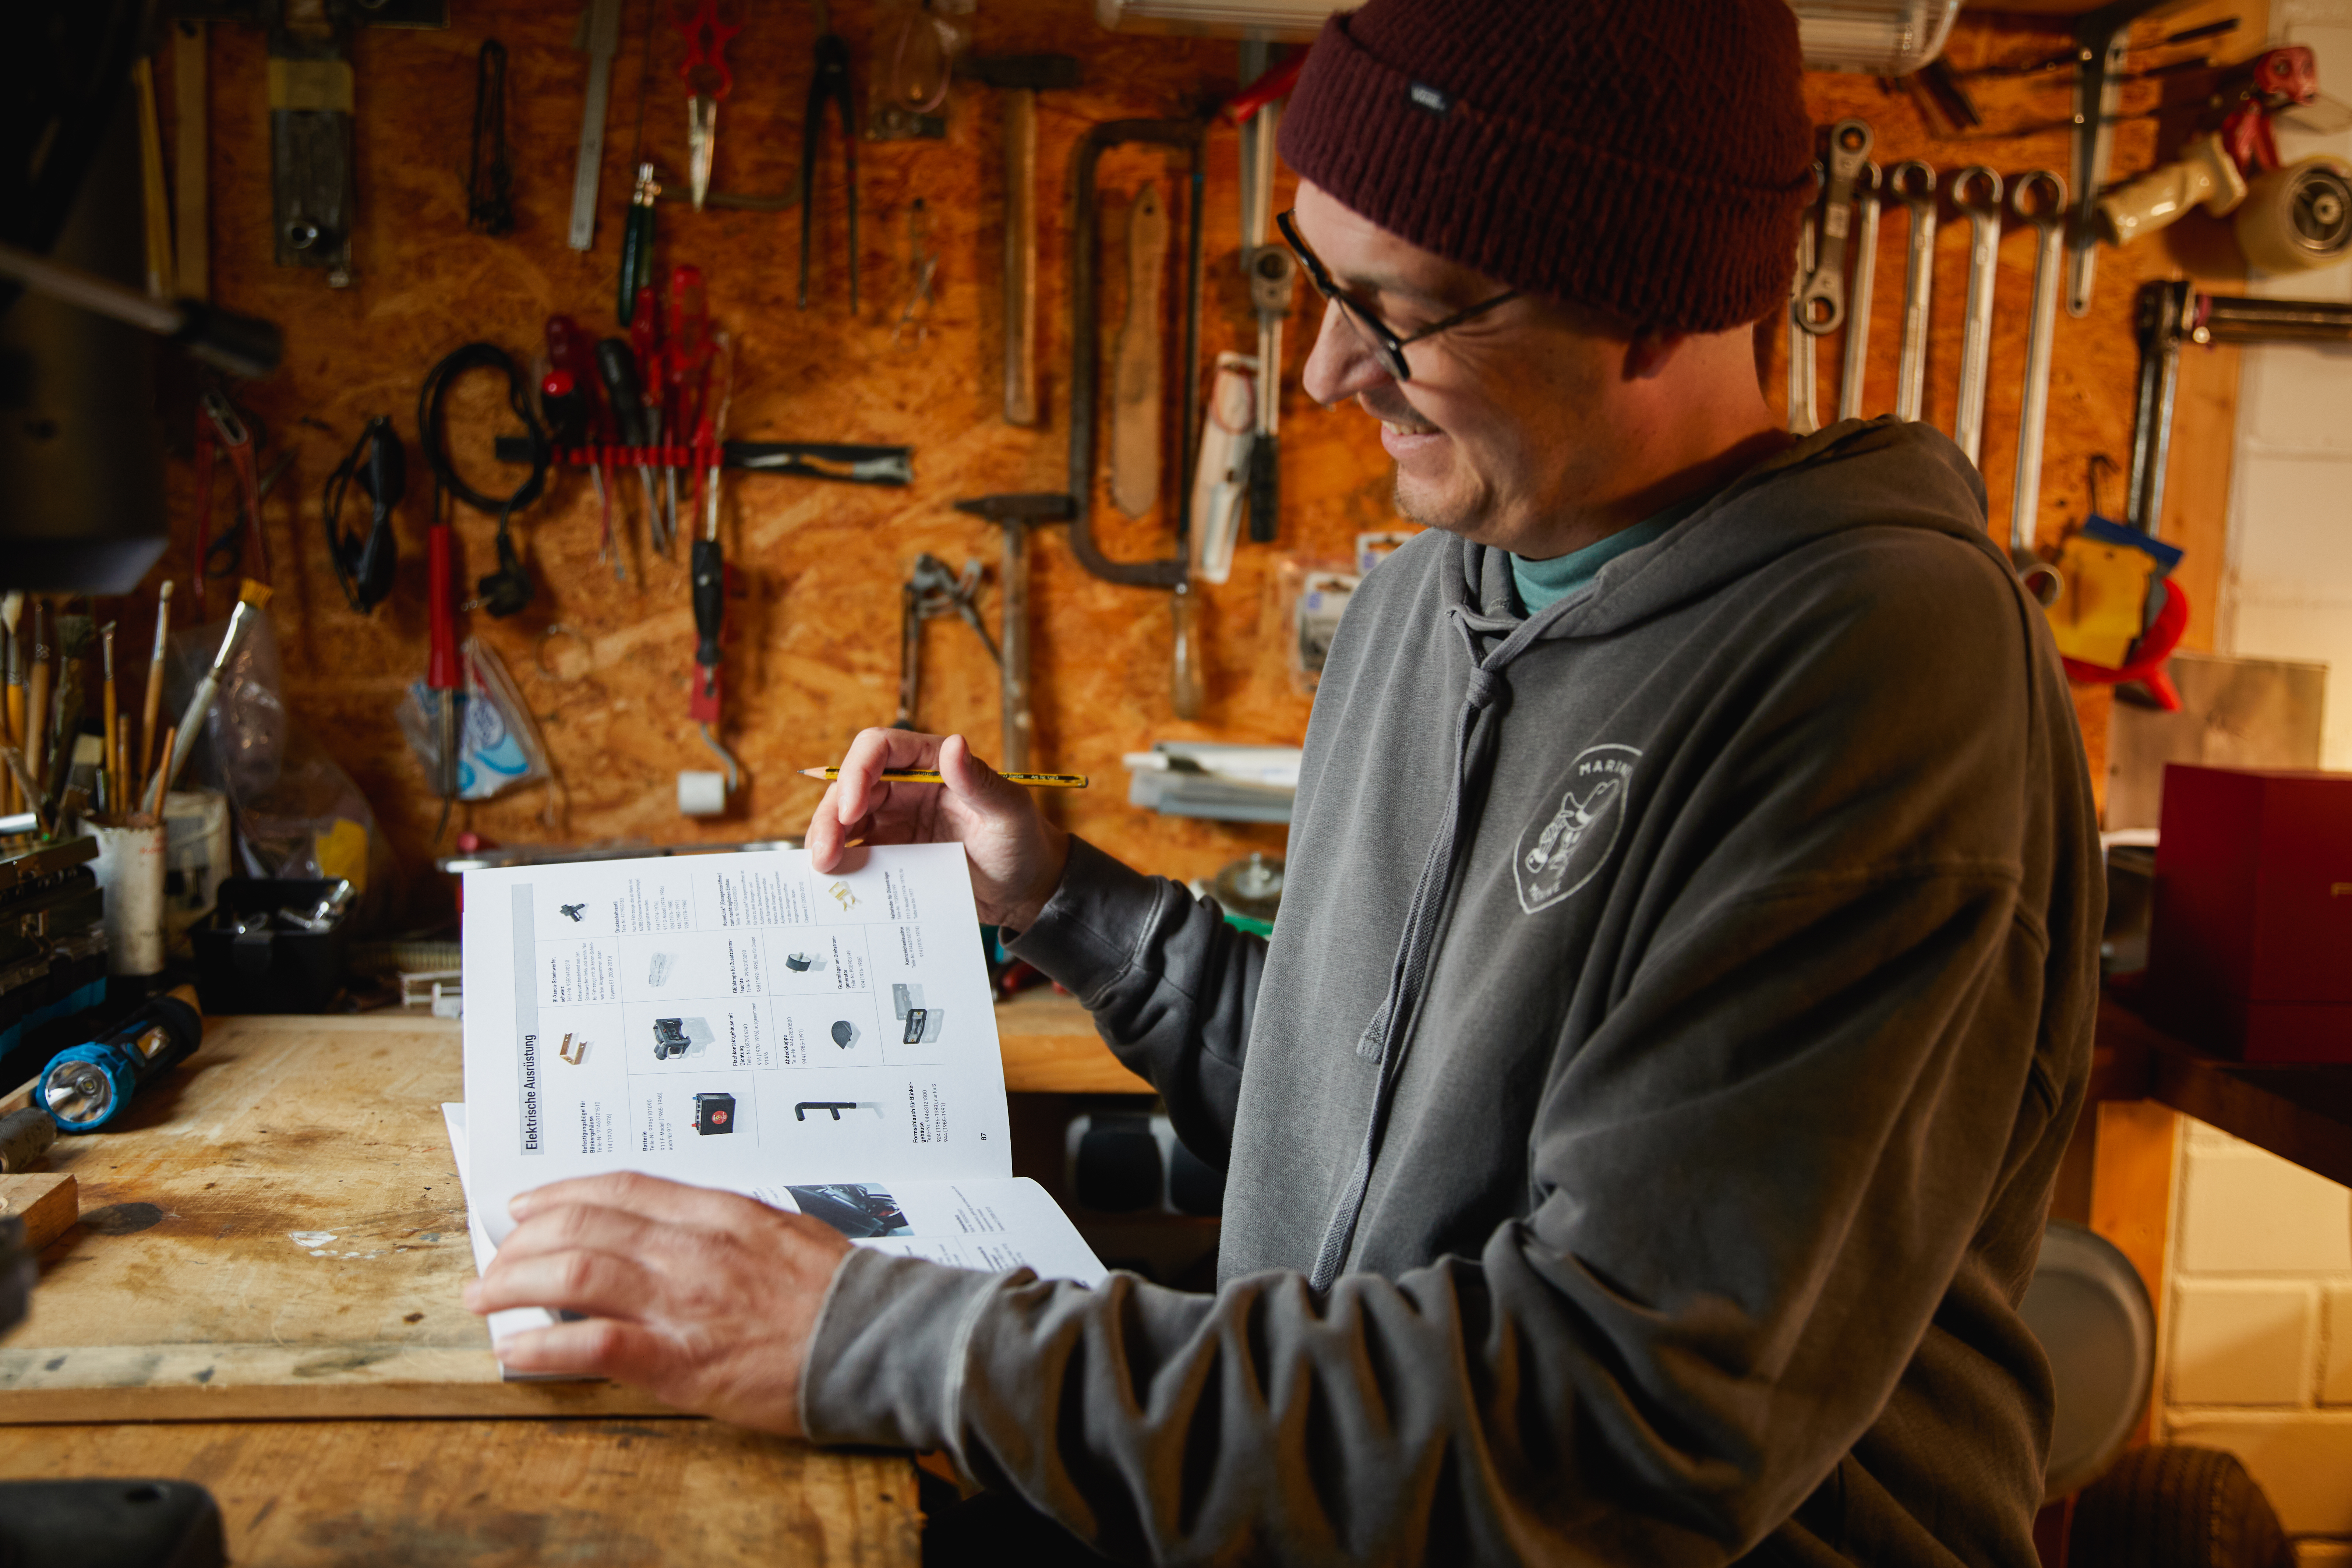 Man in workshop reads magazine, tools hanging on wall behind